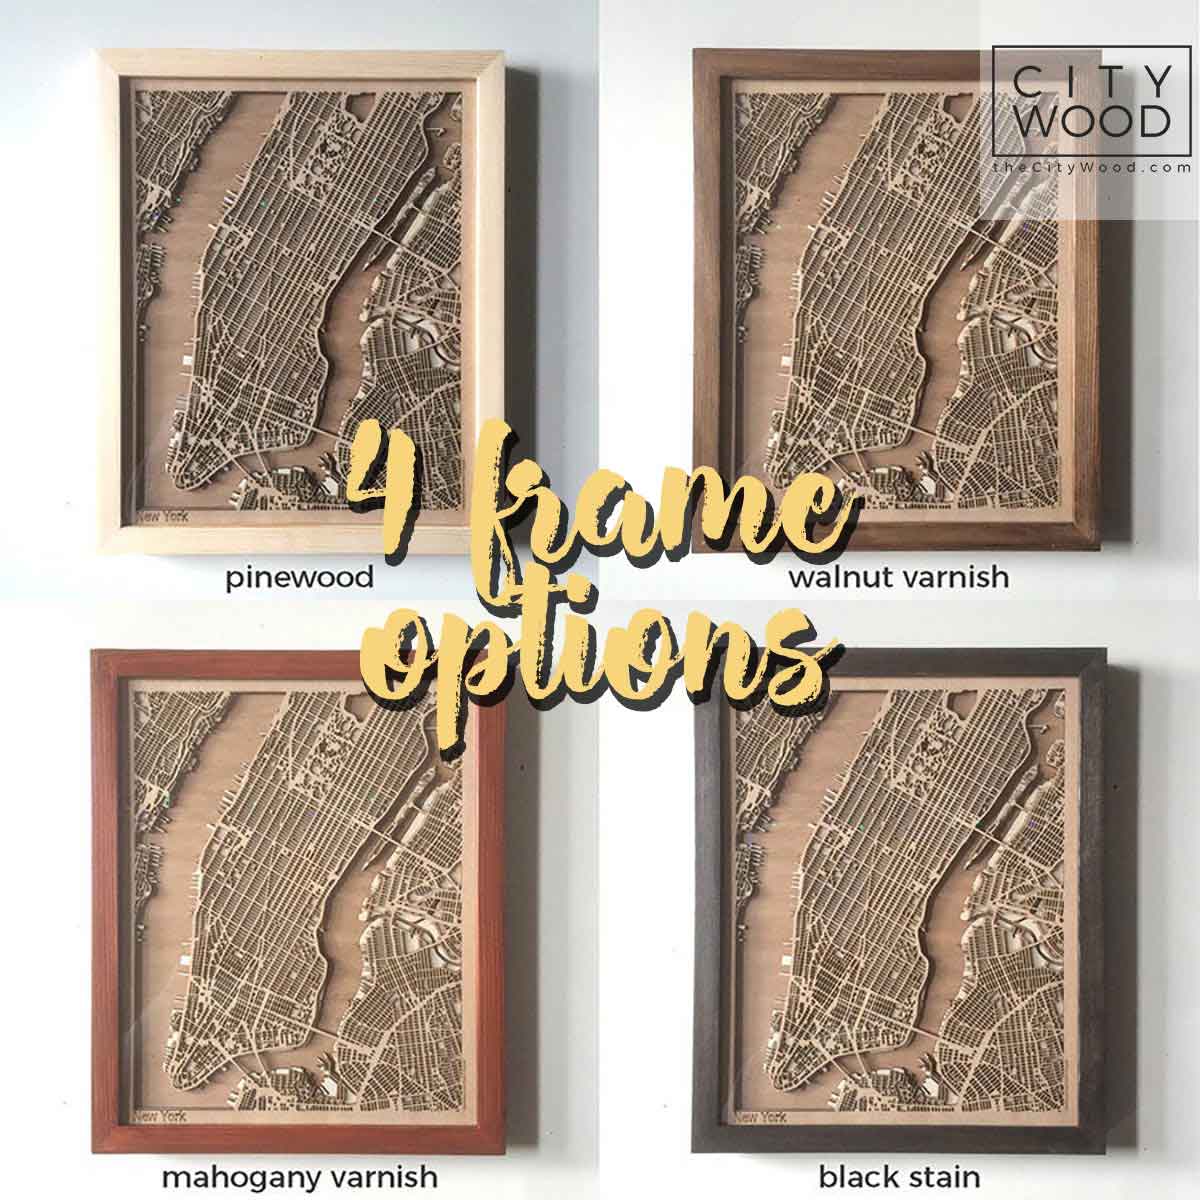 Custom City Wooden Map by CityWood - Custom Wood Map Art - Unique Laser Cut Engraved - Anniversary Gift